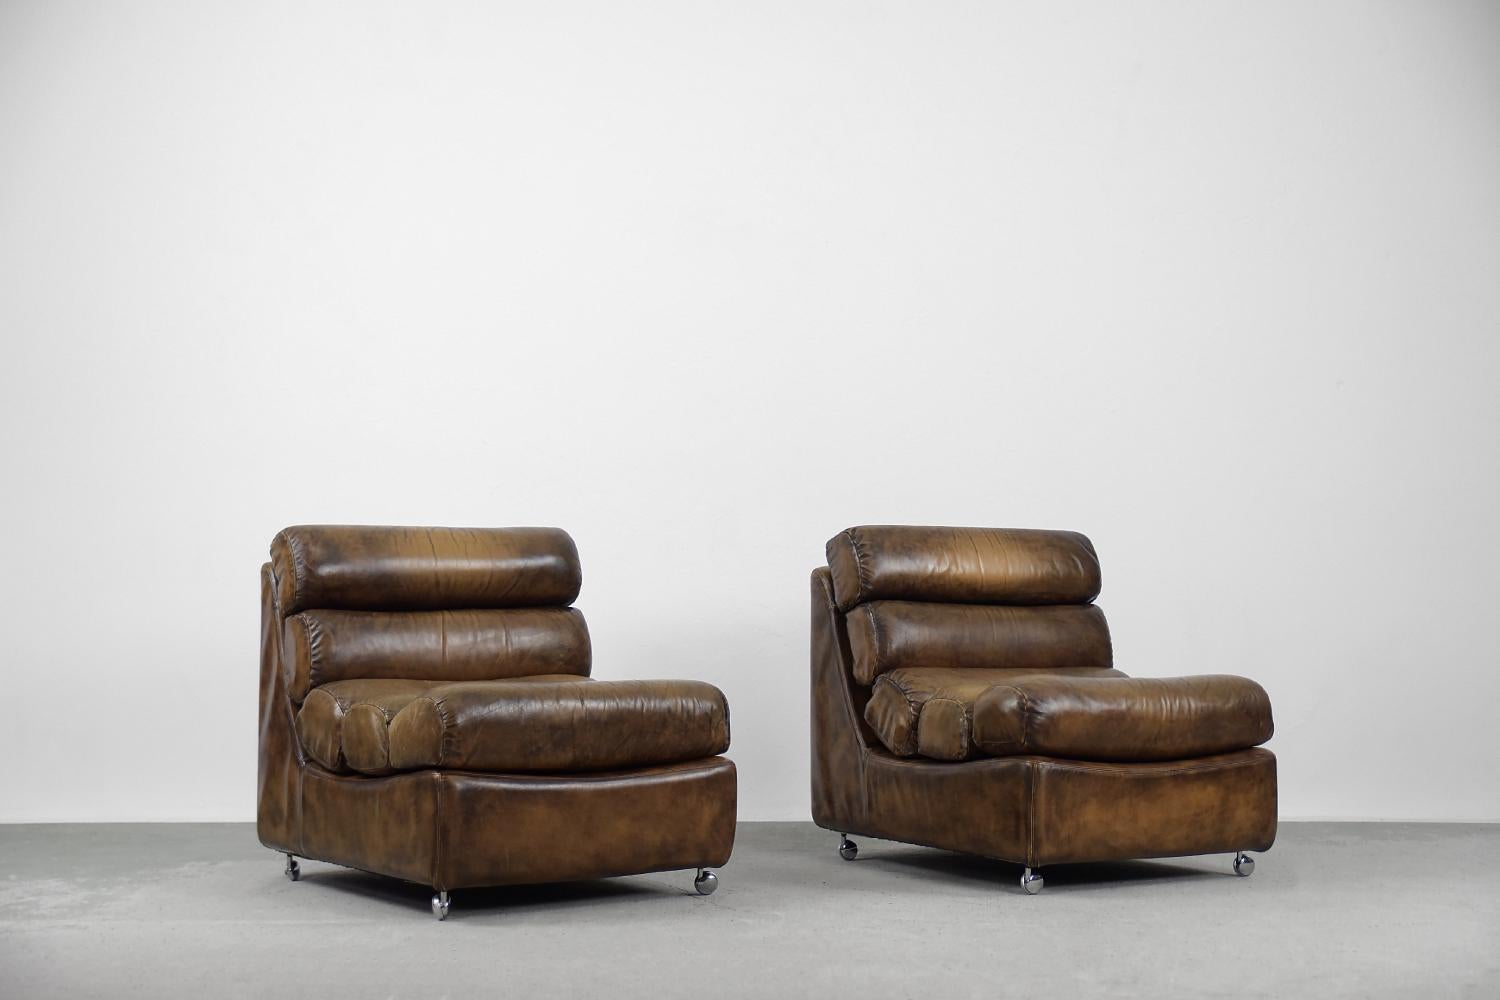 Mid-20th Century Pair of Rare Vintage Brutalist Dark Brown Leather Armchairs on Wheels, 1960s For Sale